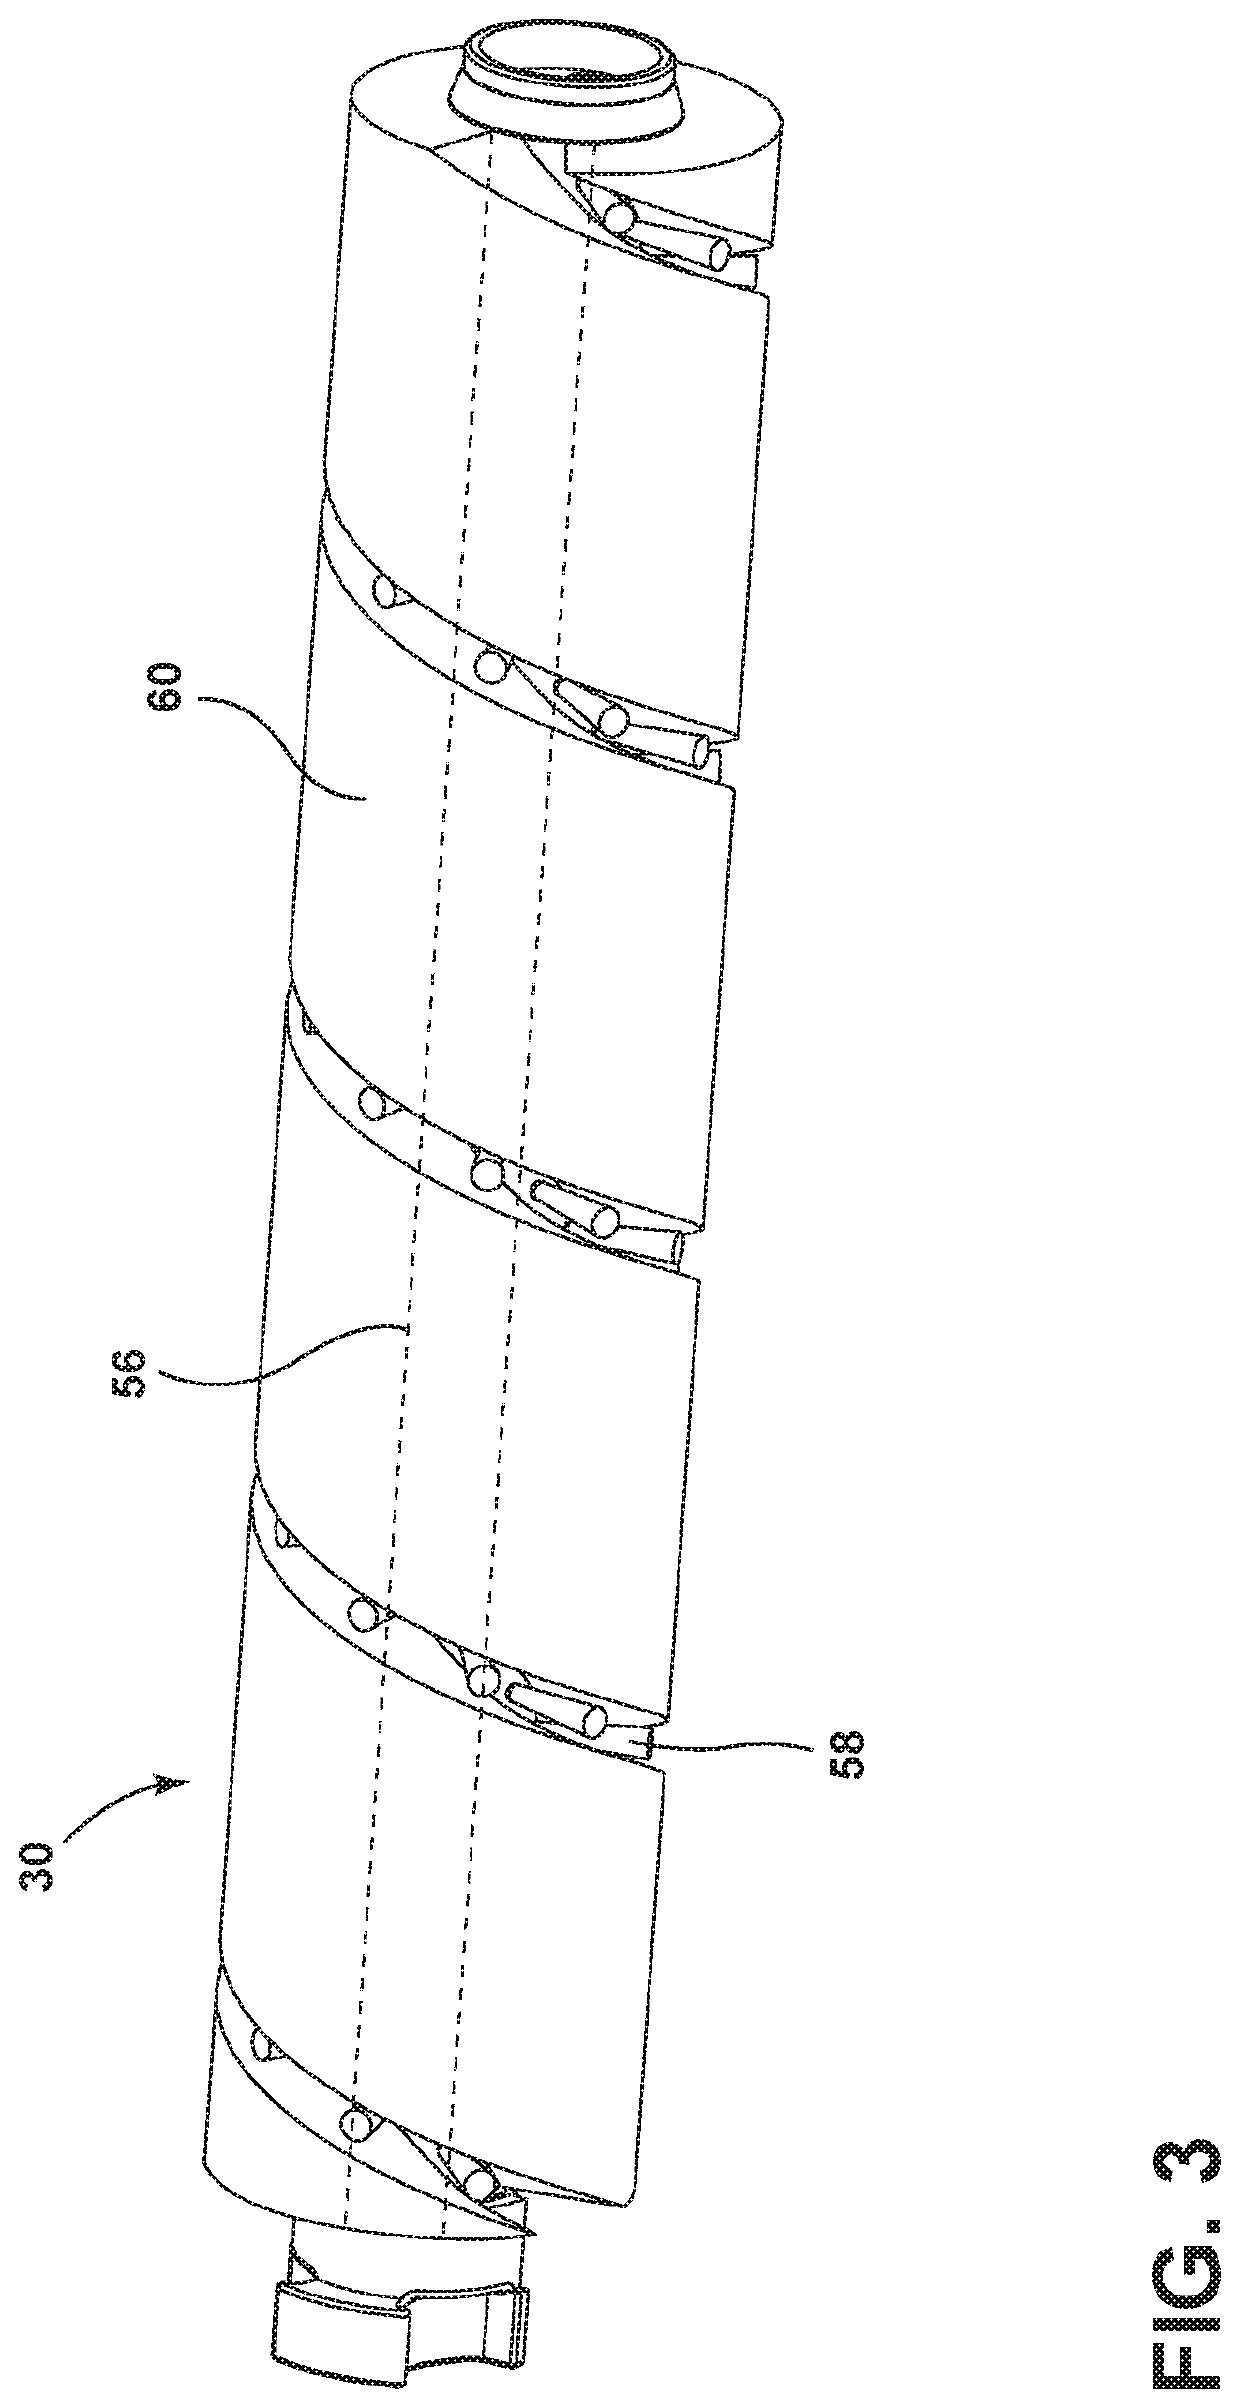 Surface cleaning apparatus with two-stage collection